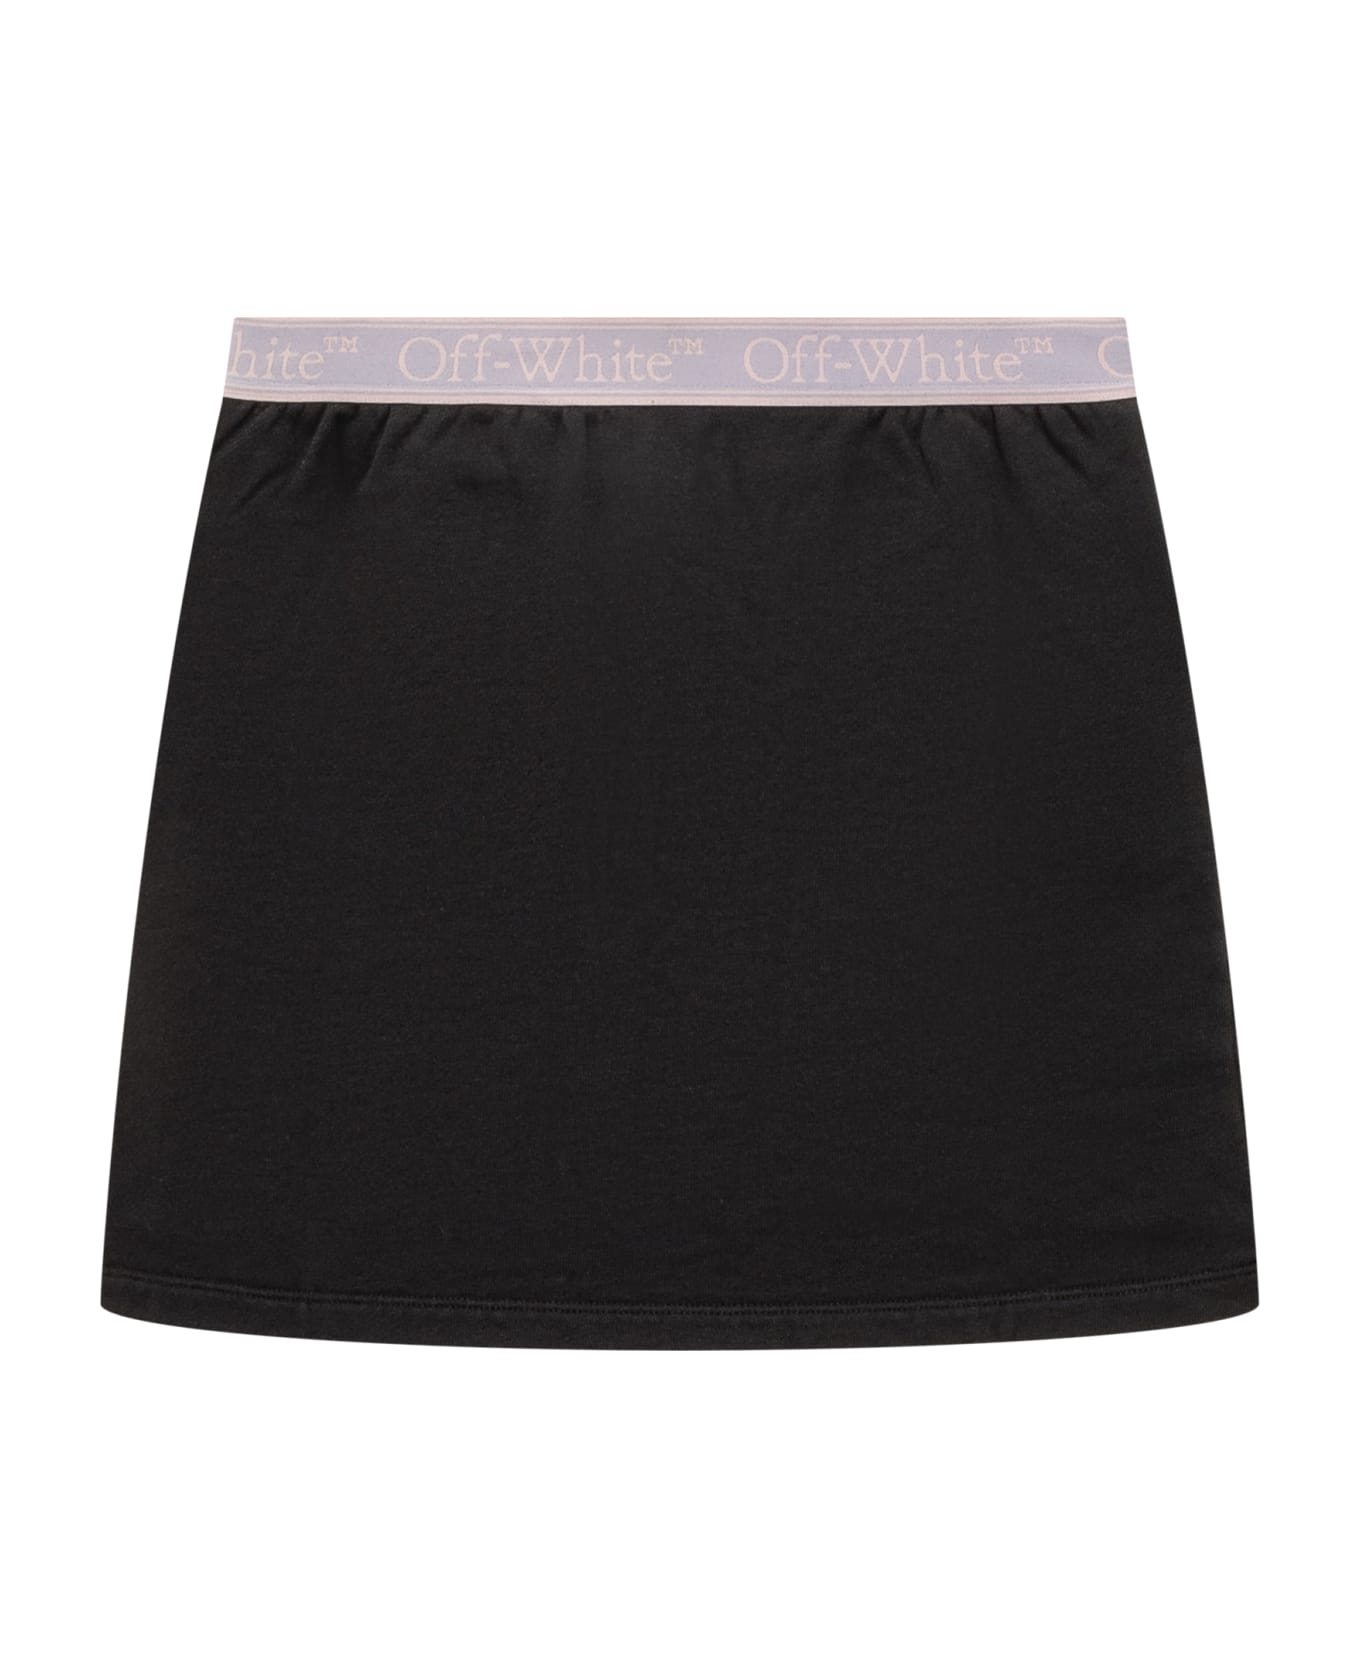 Off-White Bookish Skirt - BLACK LILAC